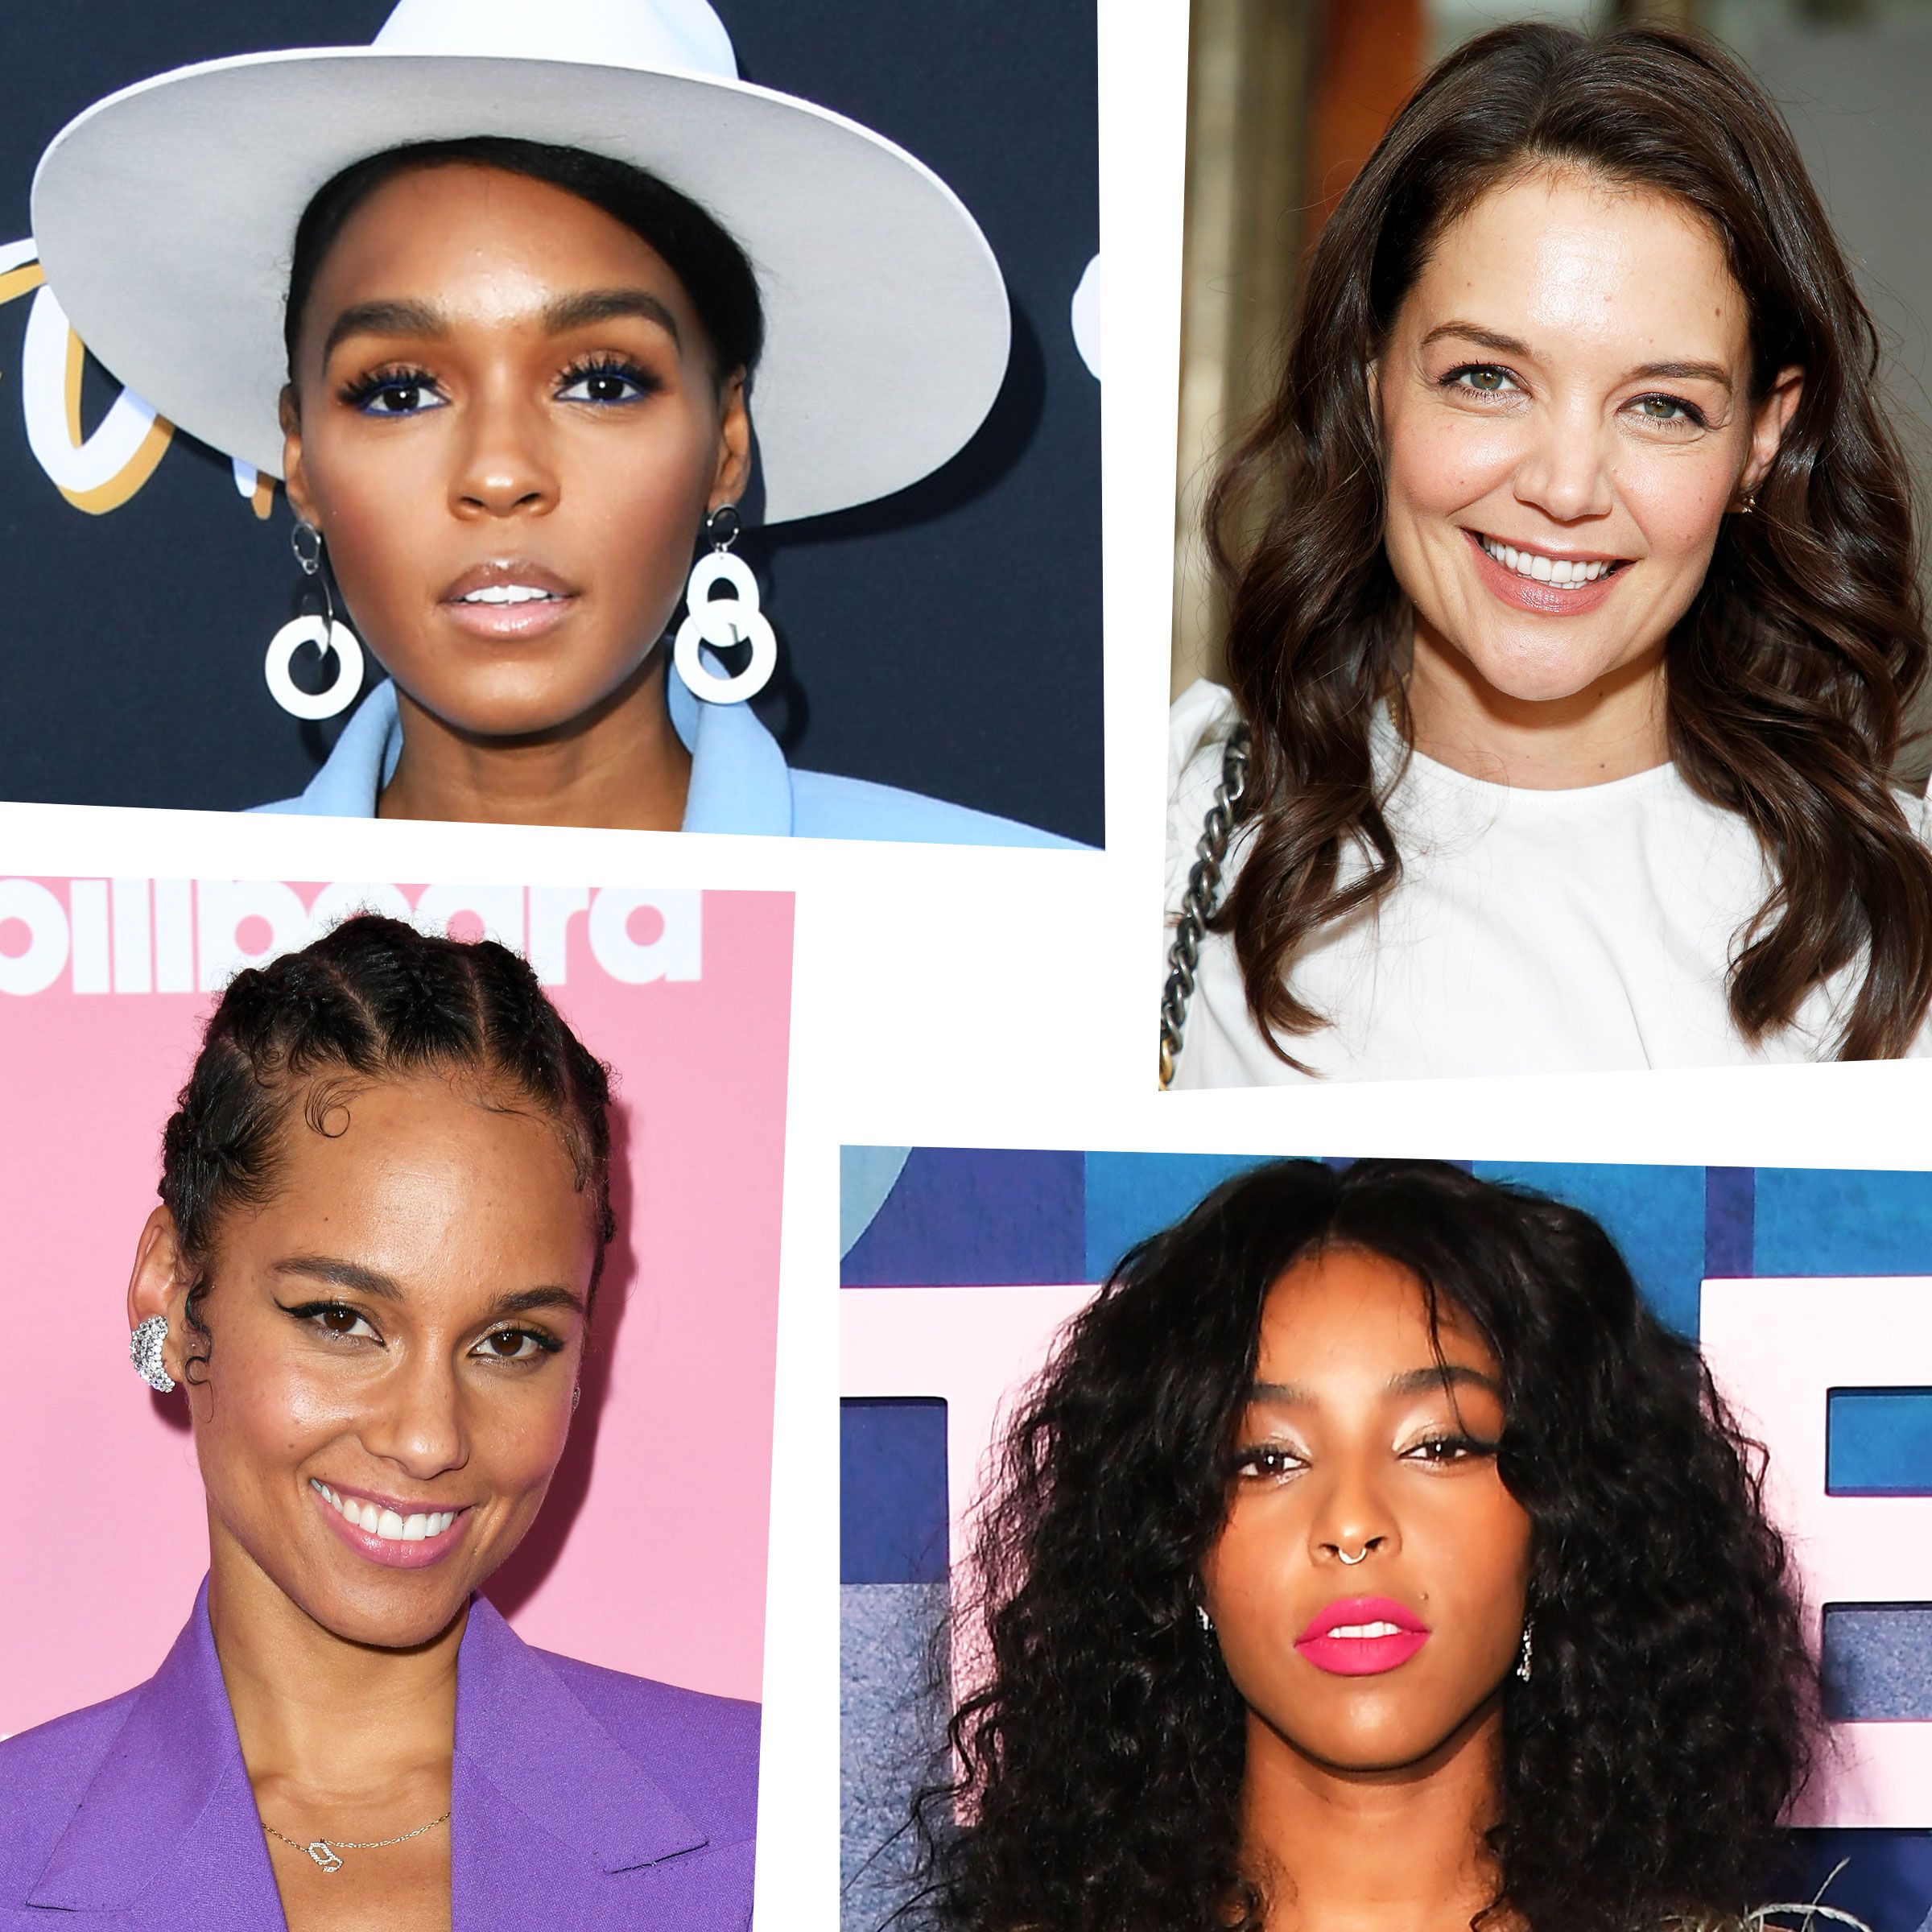 25 Female Celebrities Who Use Their Power For Good